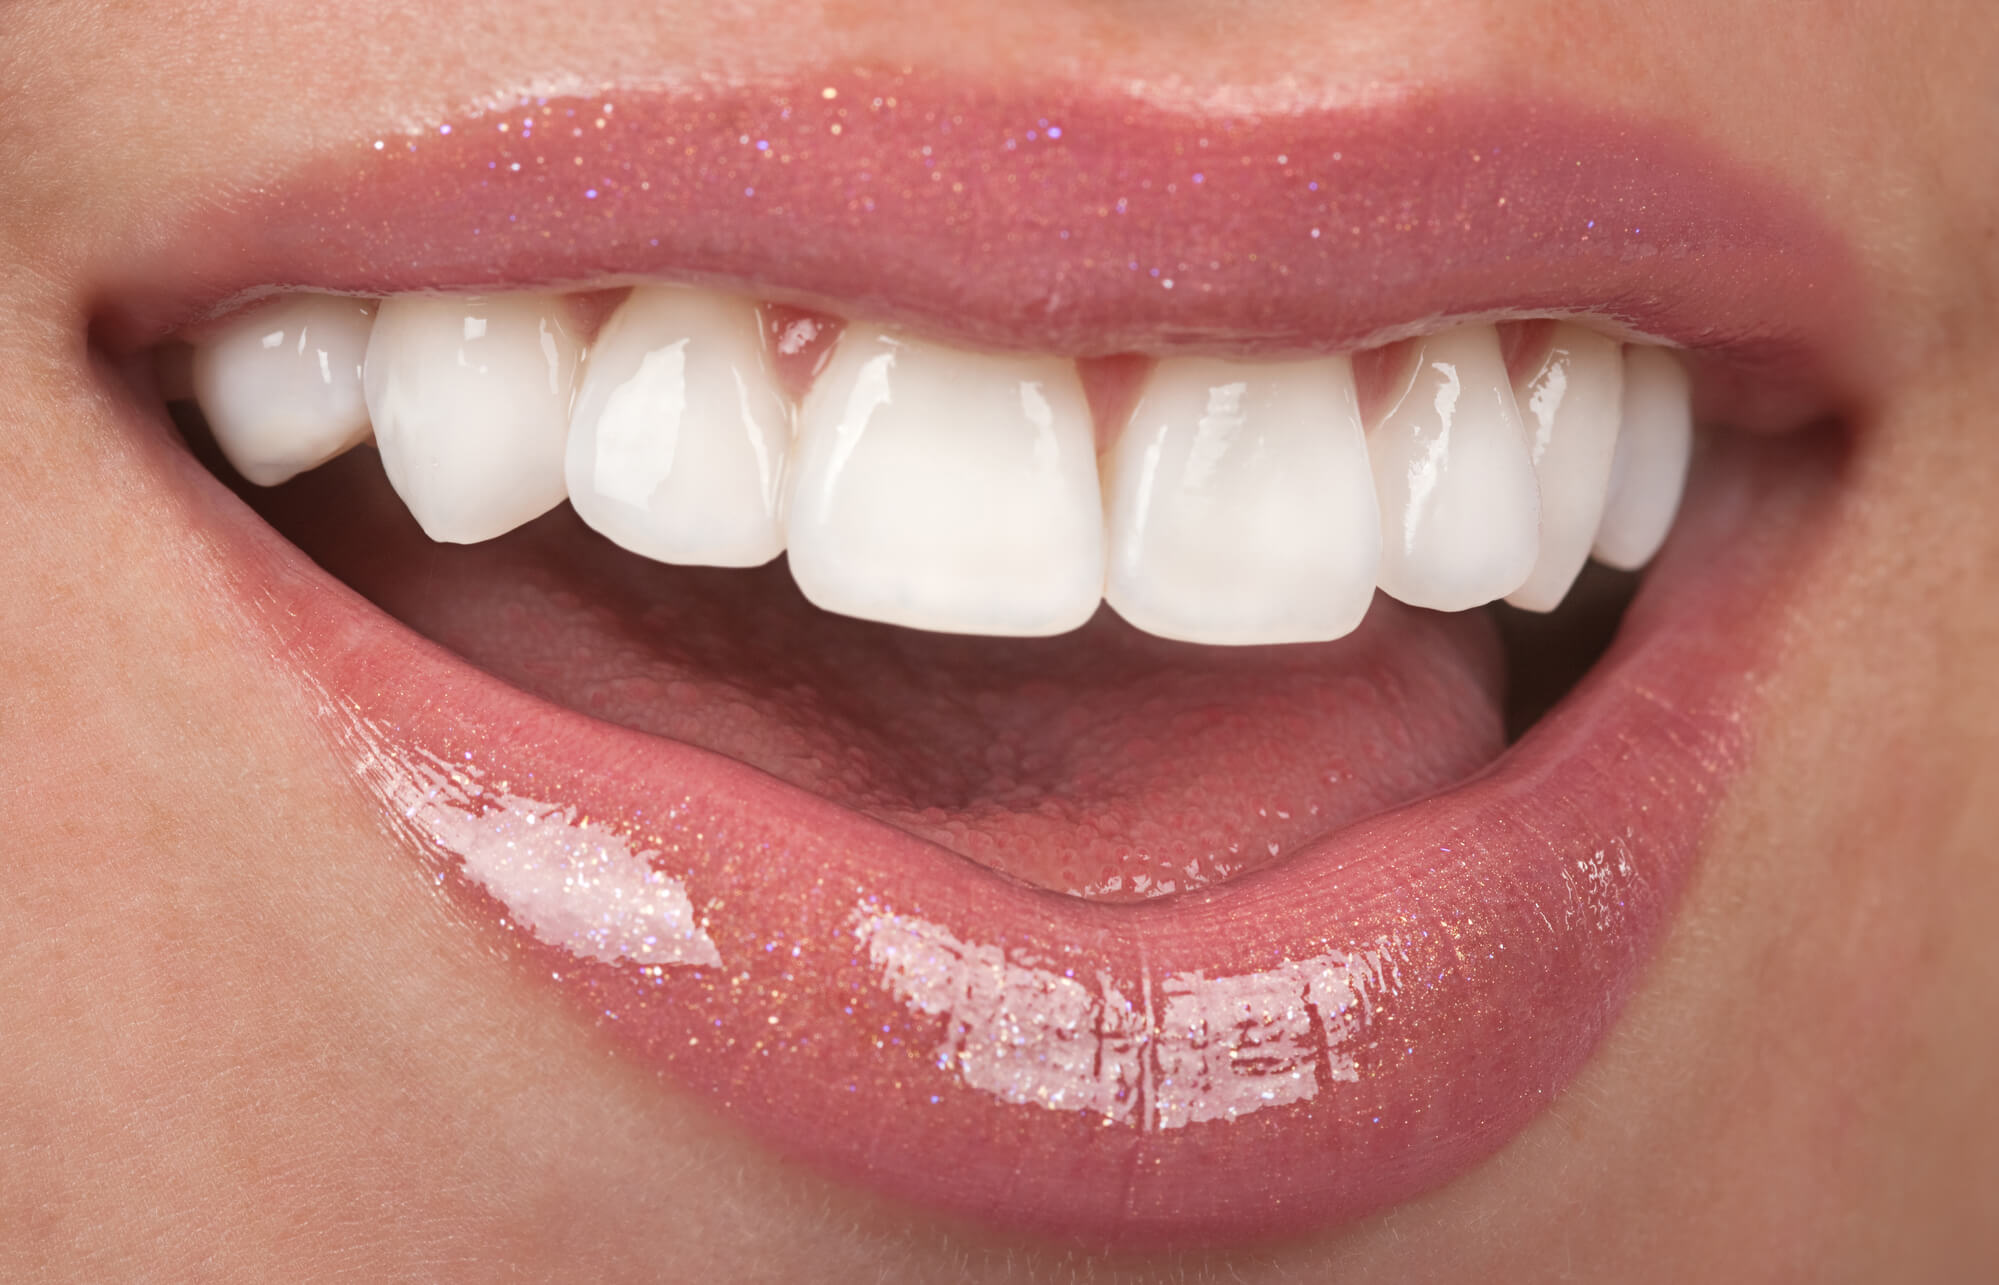 where is the best teeth whitening miami?